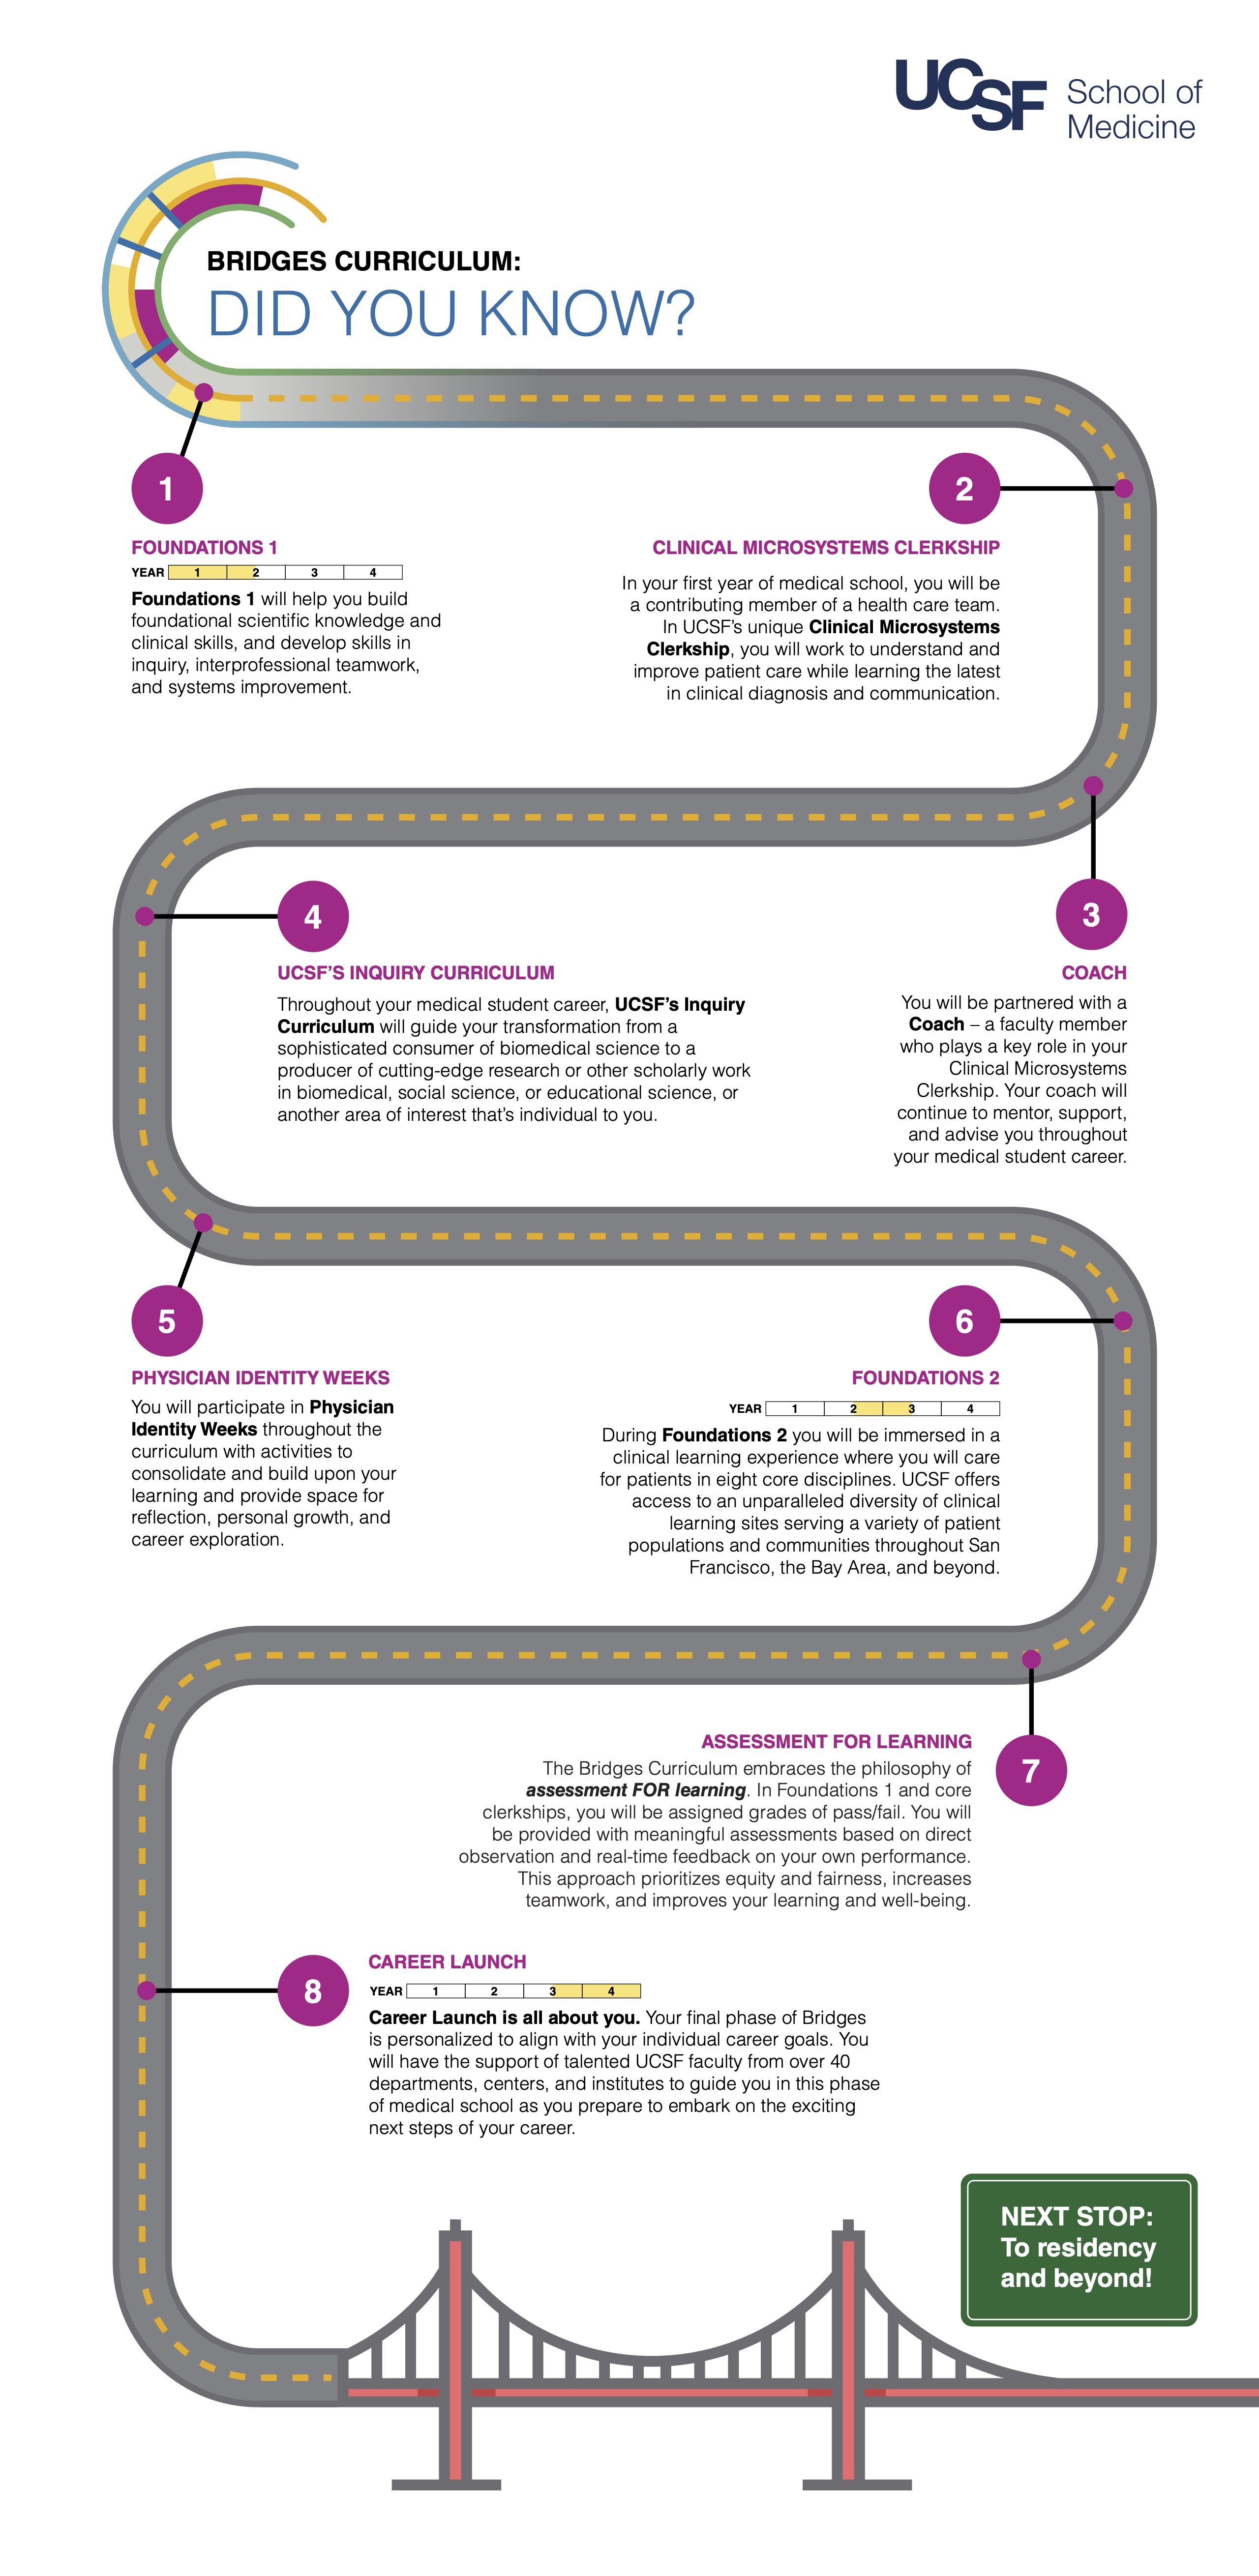 road-themed infographic showing the different "stops" along the road of the Bridges Curriculum, from Foundations 1 in the first year to Career Launch in the fourth and final year